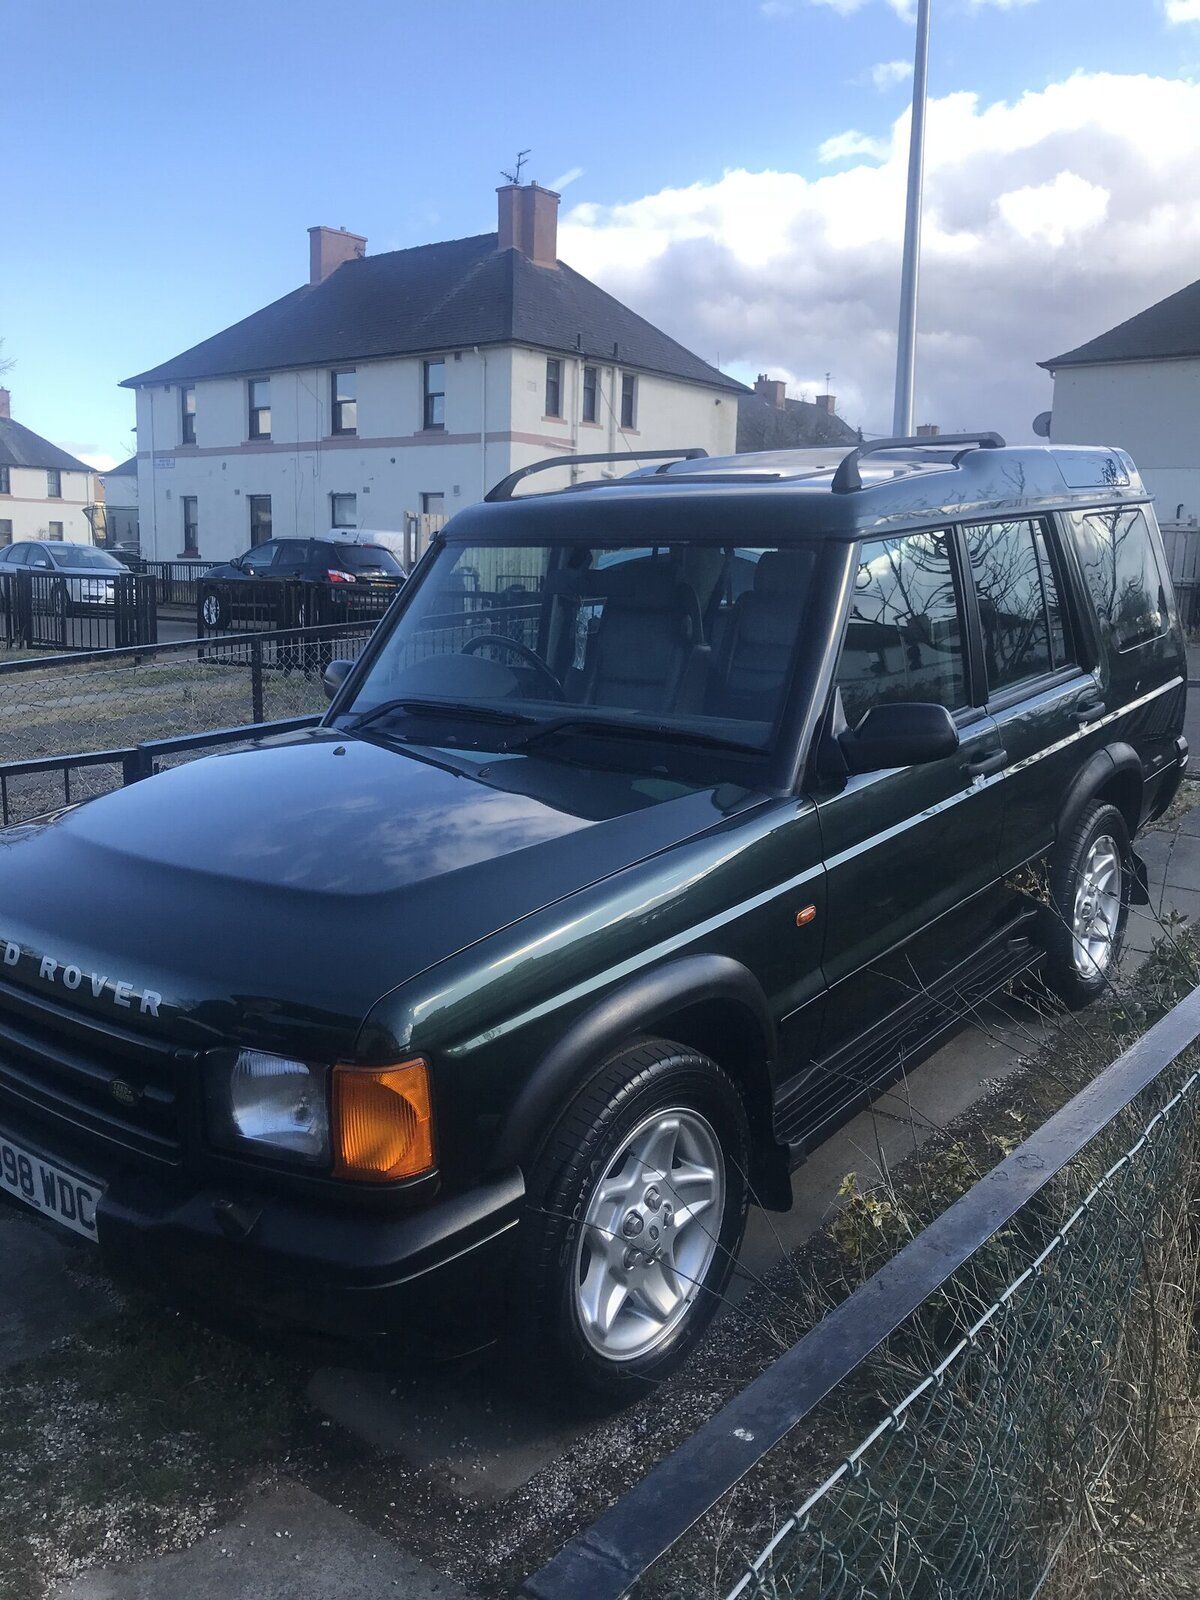 Landrover Discovery 2 TD5 LandyZone Land Rover Forum